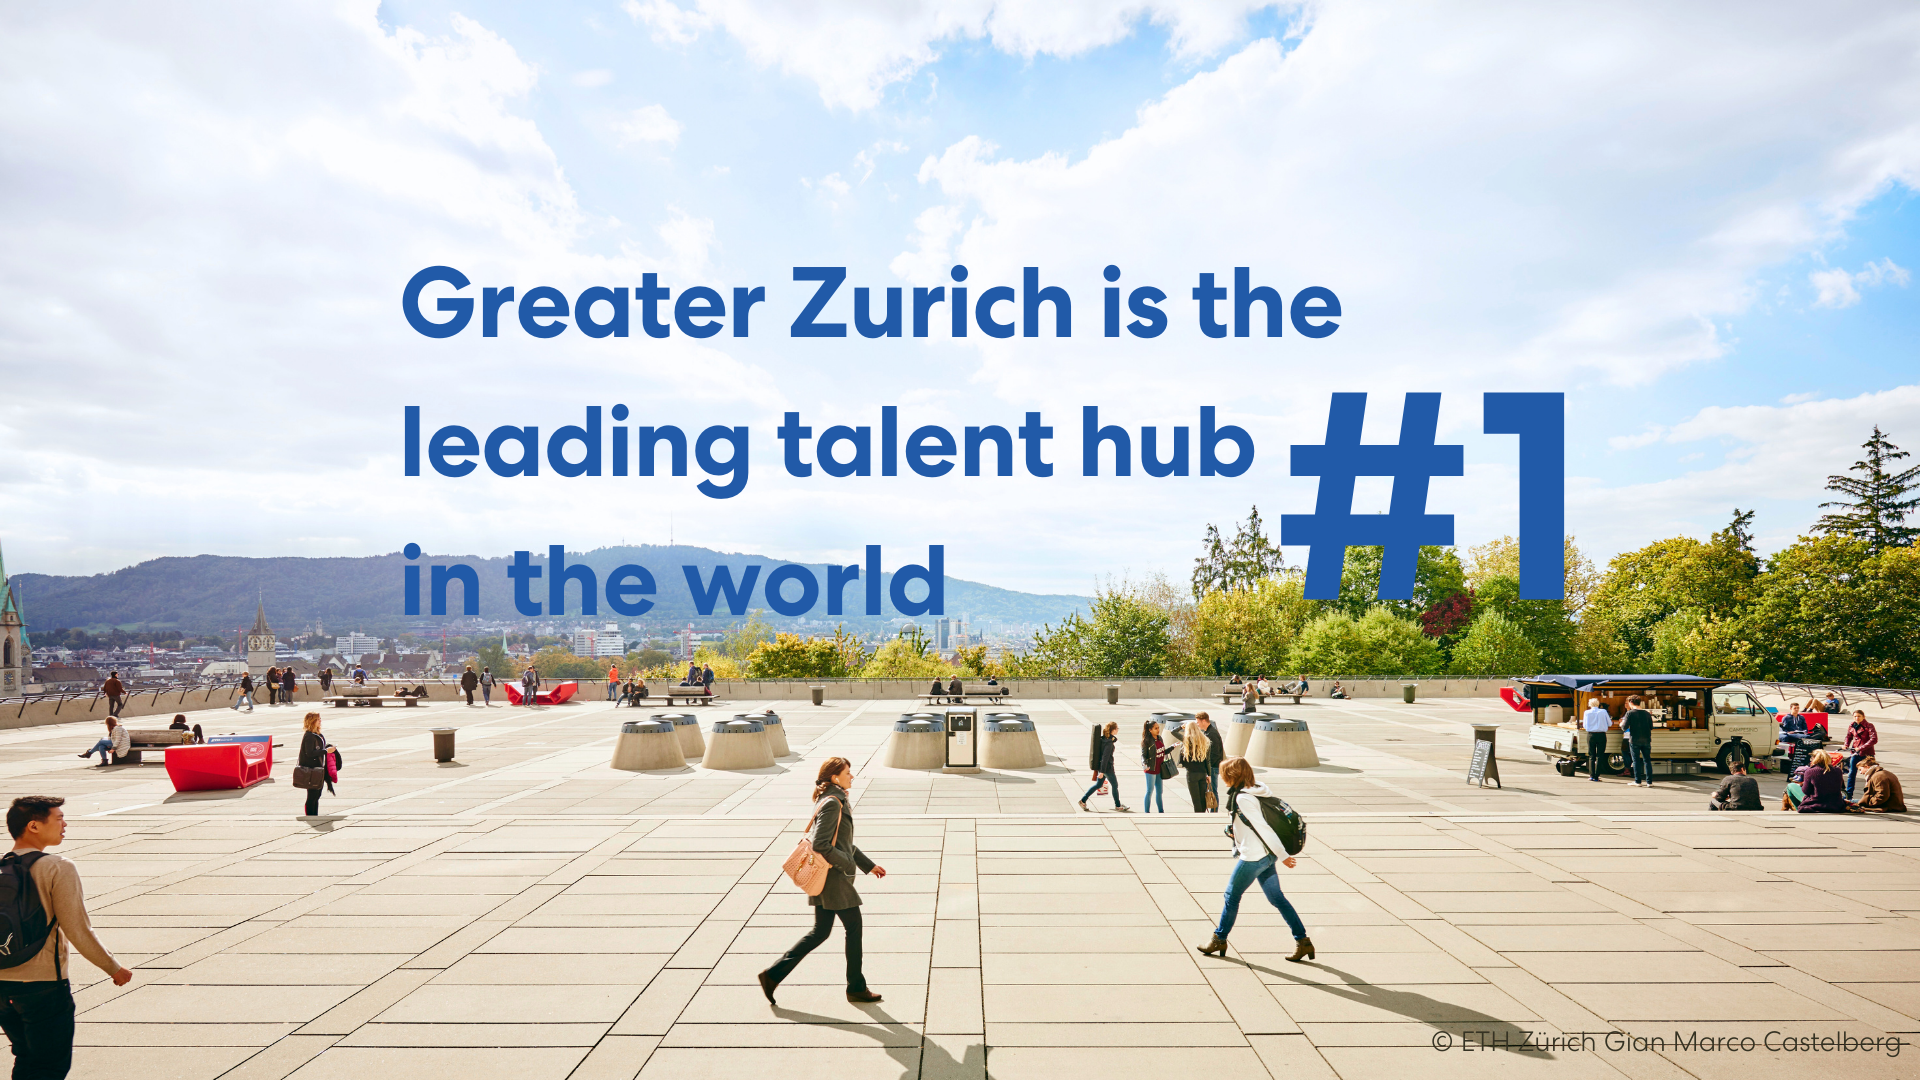 Top talent accessability in Greater Zurich, the world's leading talent hub for attracting, developing, and retaining highly-skilled employees